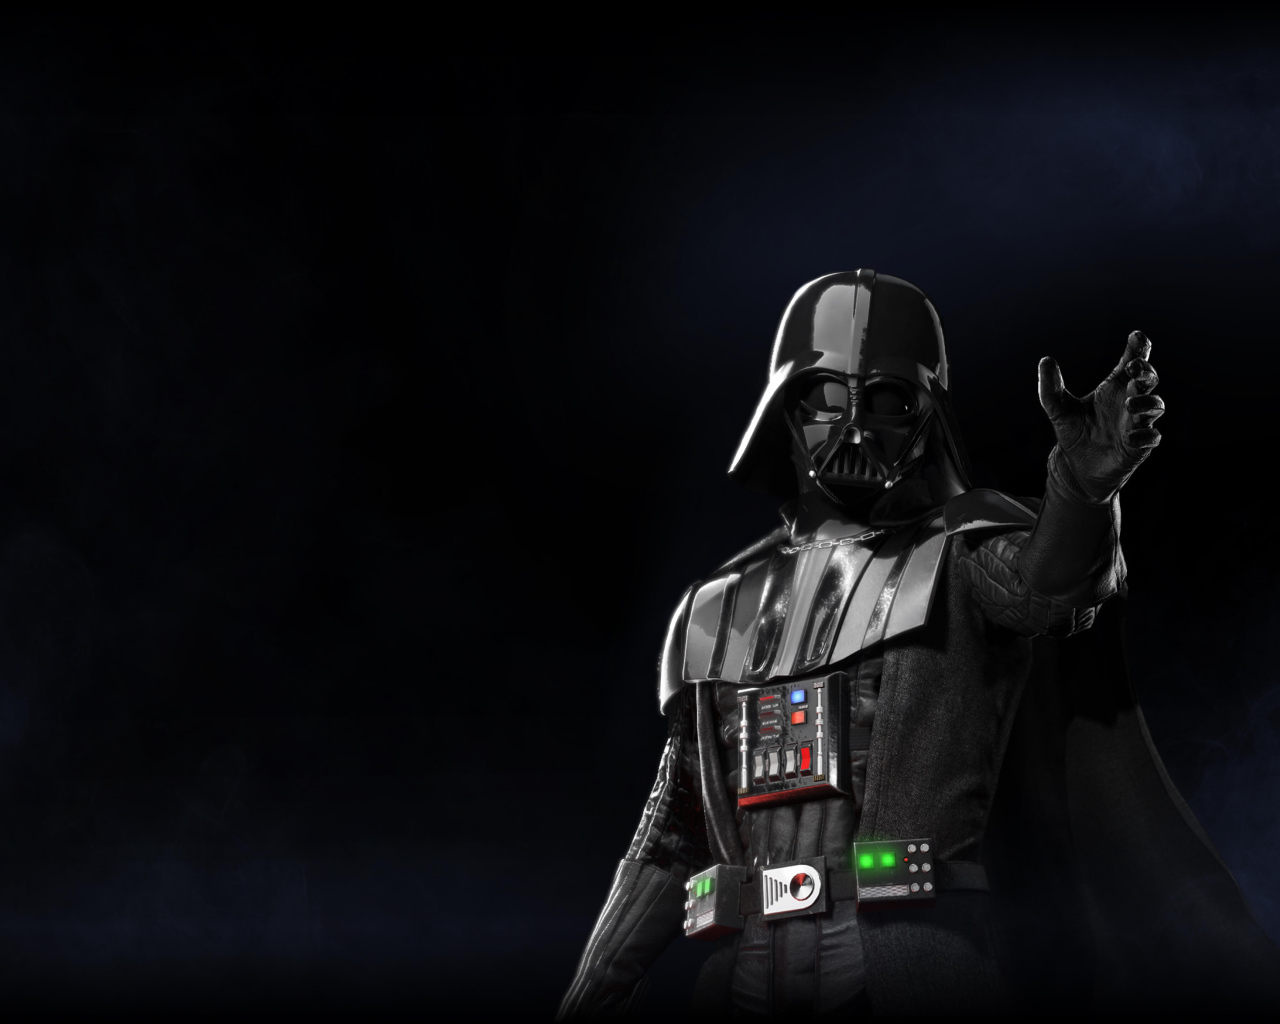 Darth Vader character of the computer game Star Wars. Battlefront II, 2017